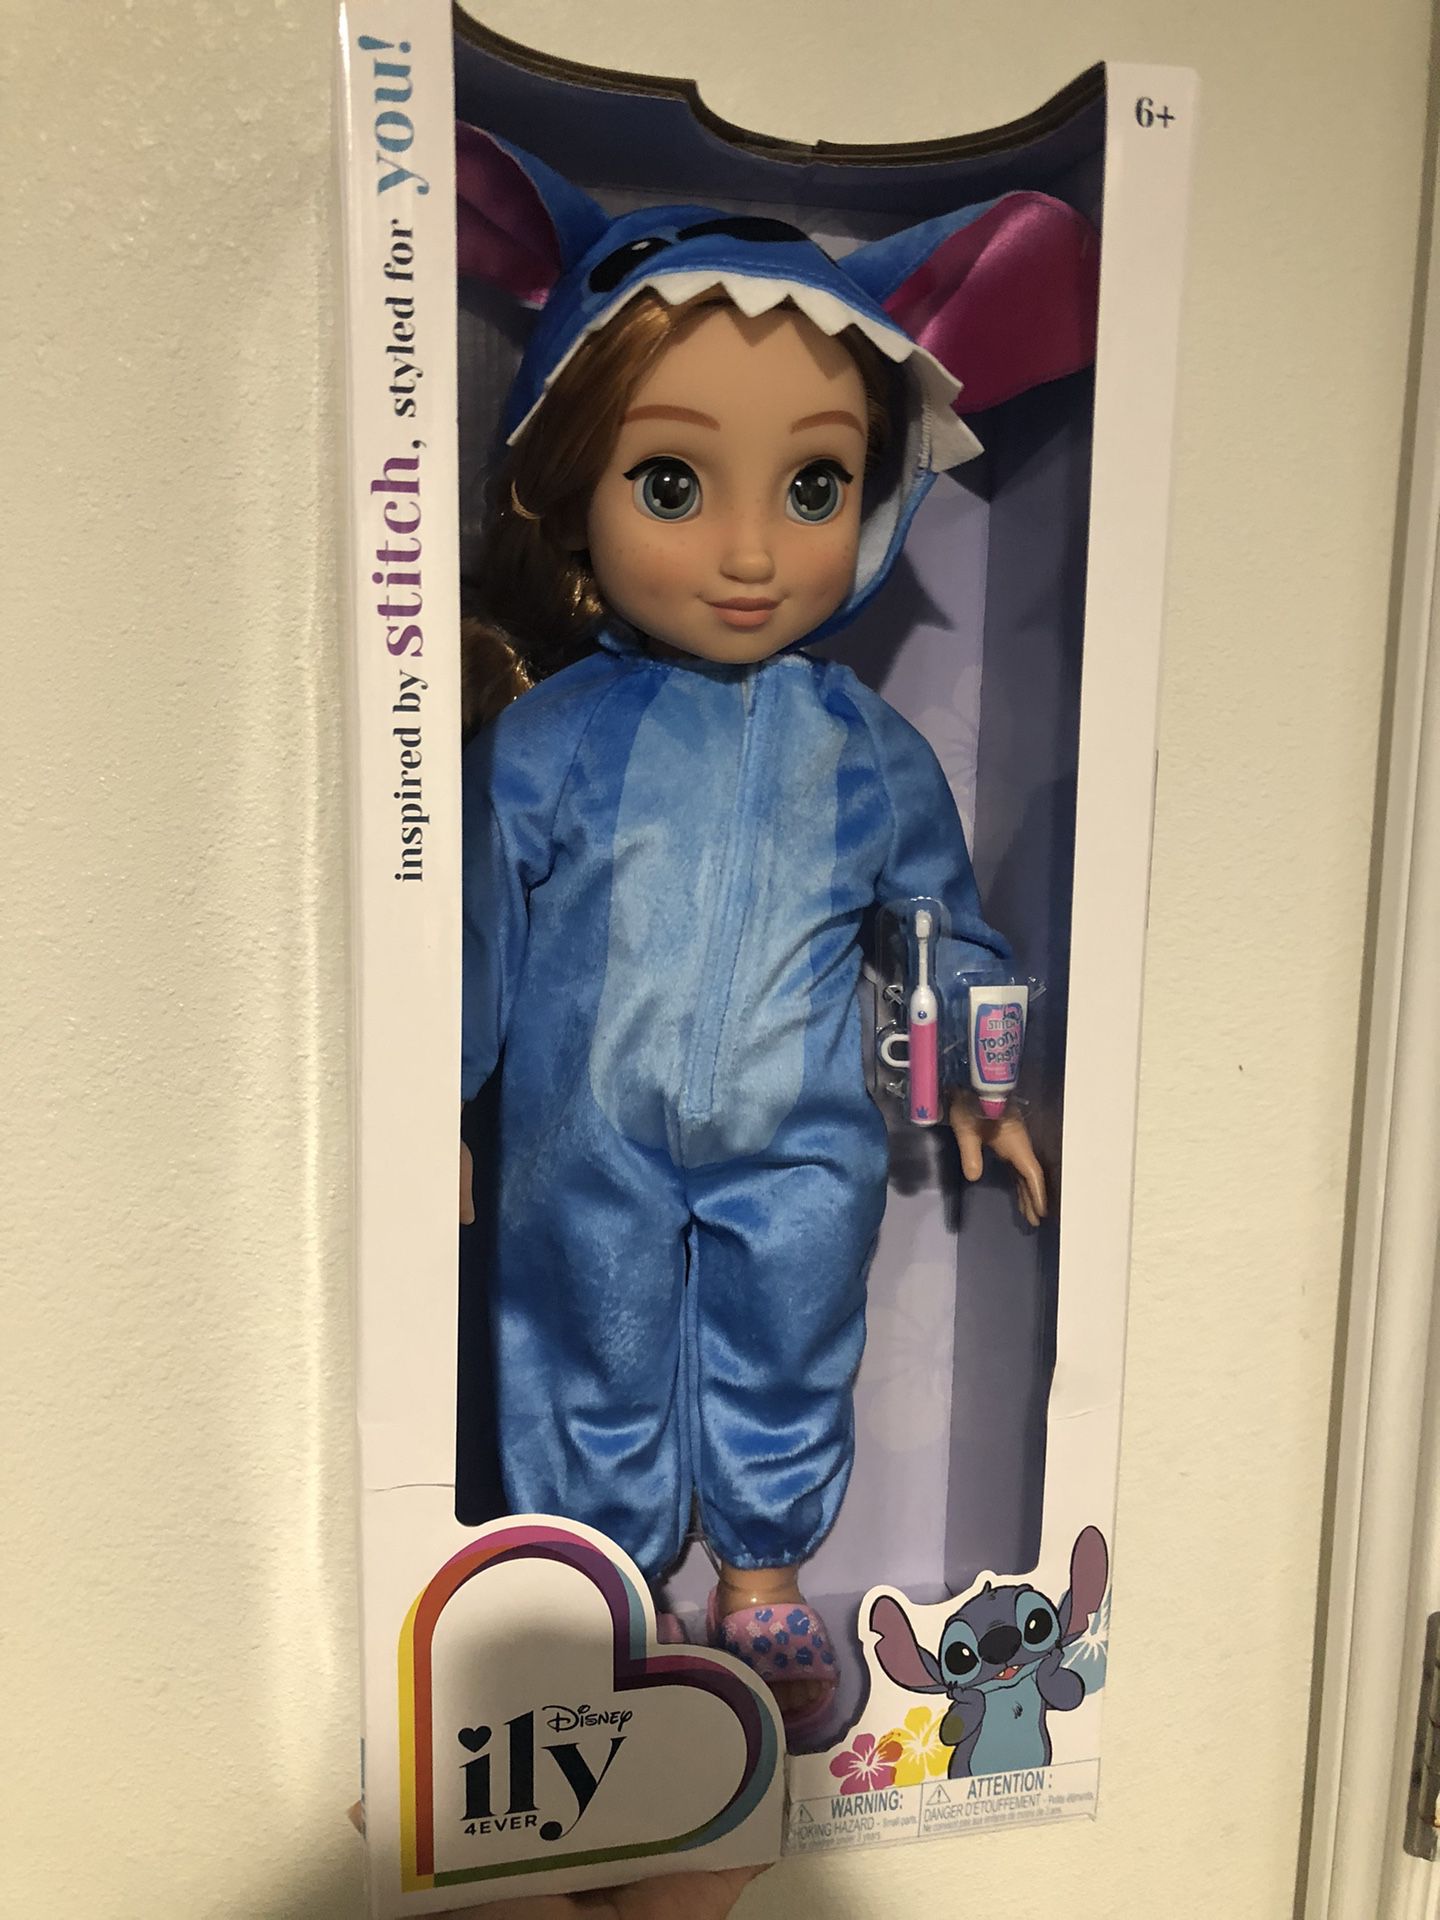 Disney ILY 4ever Stitch 18” Doll Strawberry Blonde Hair Target Exclusive